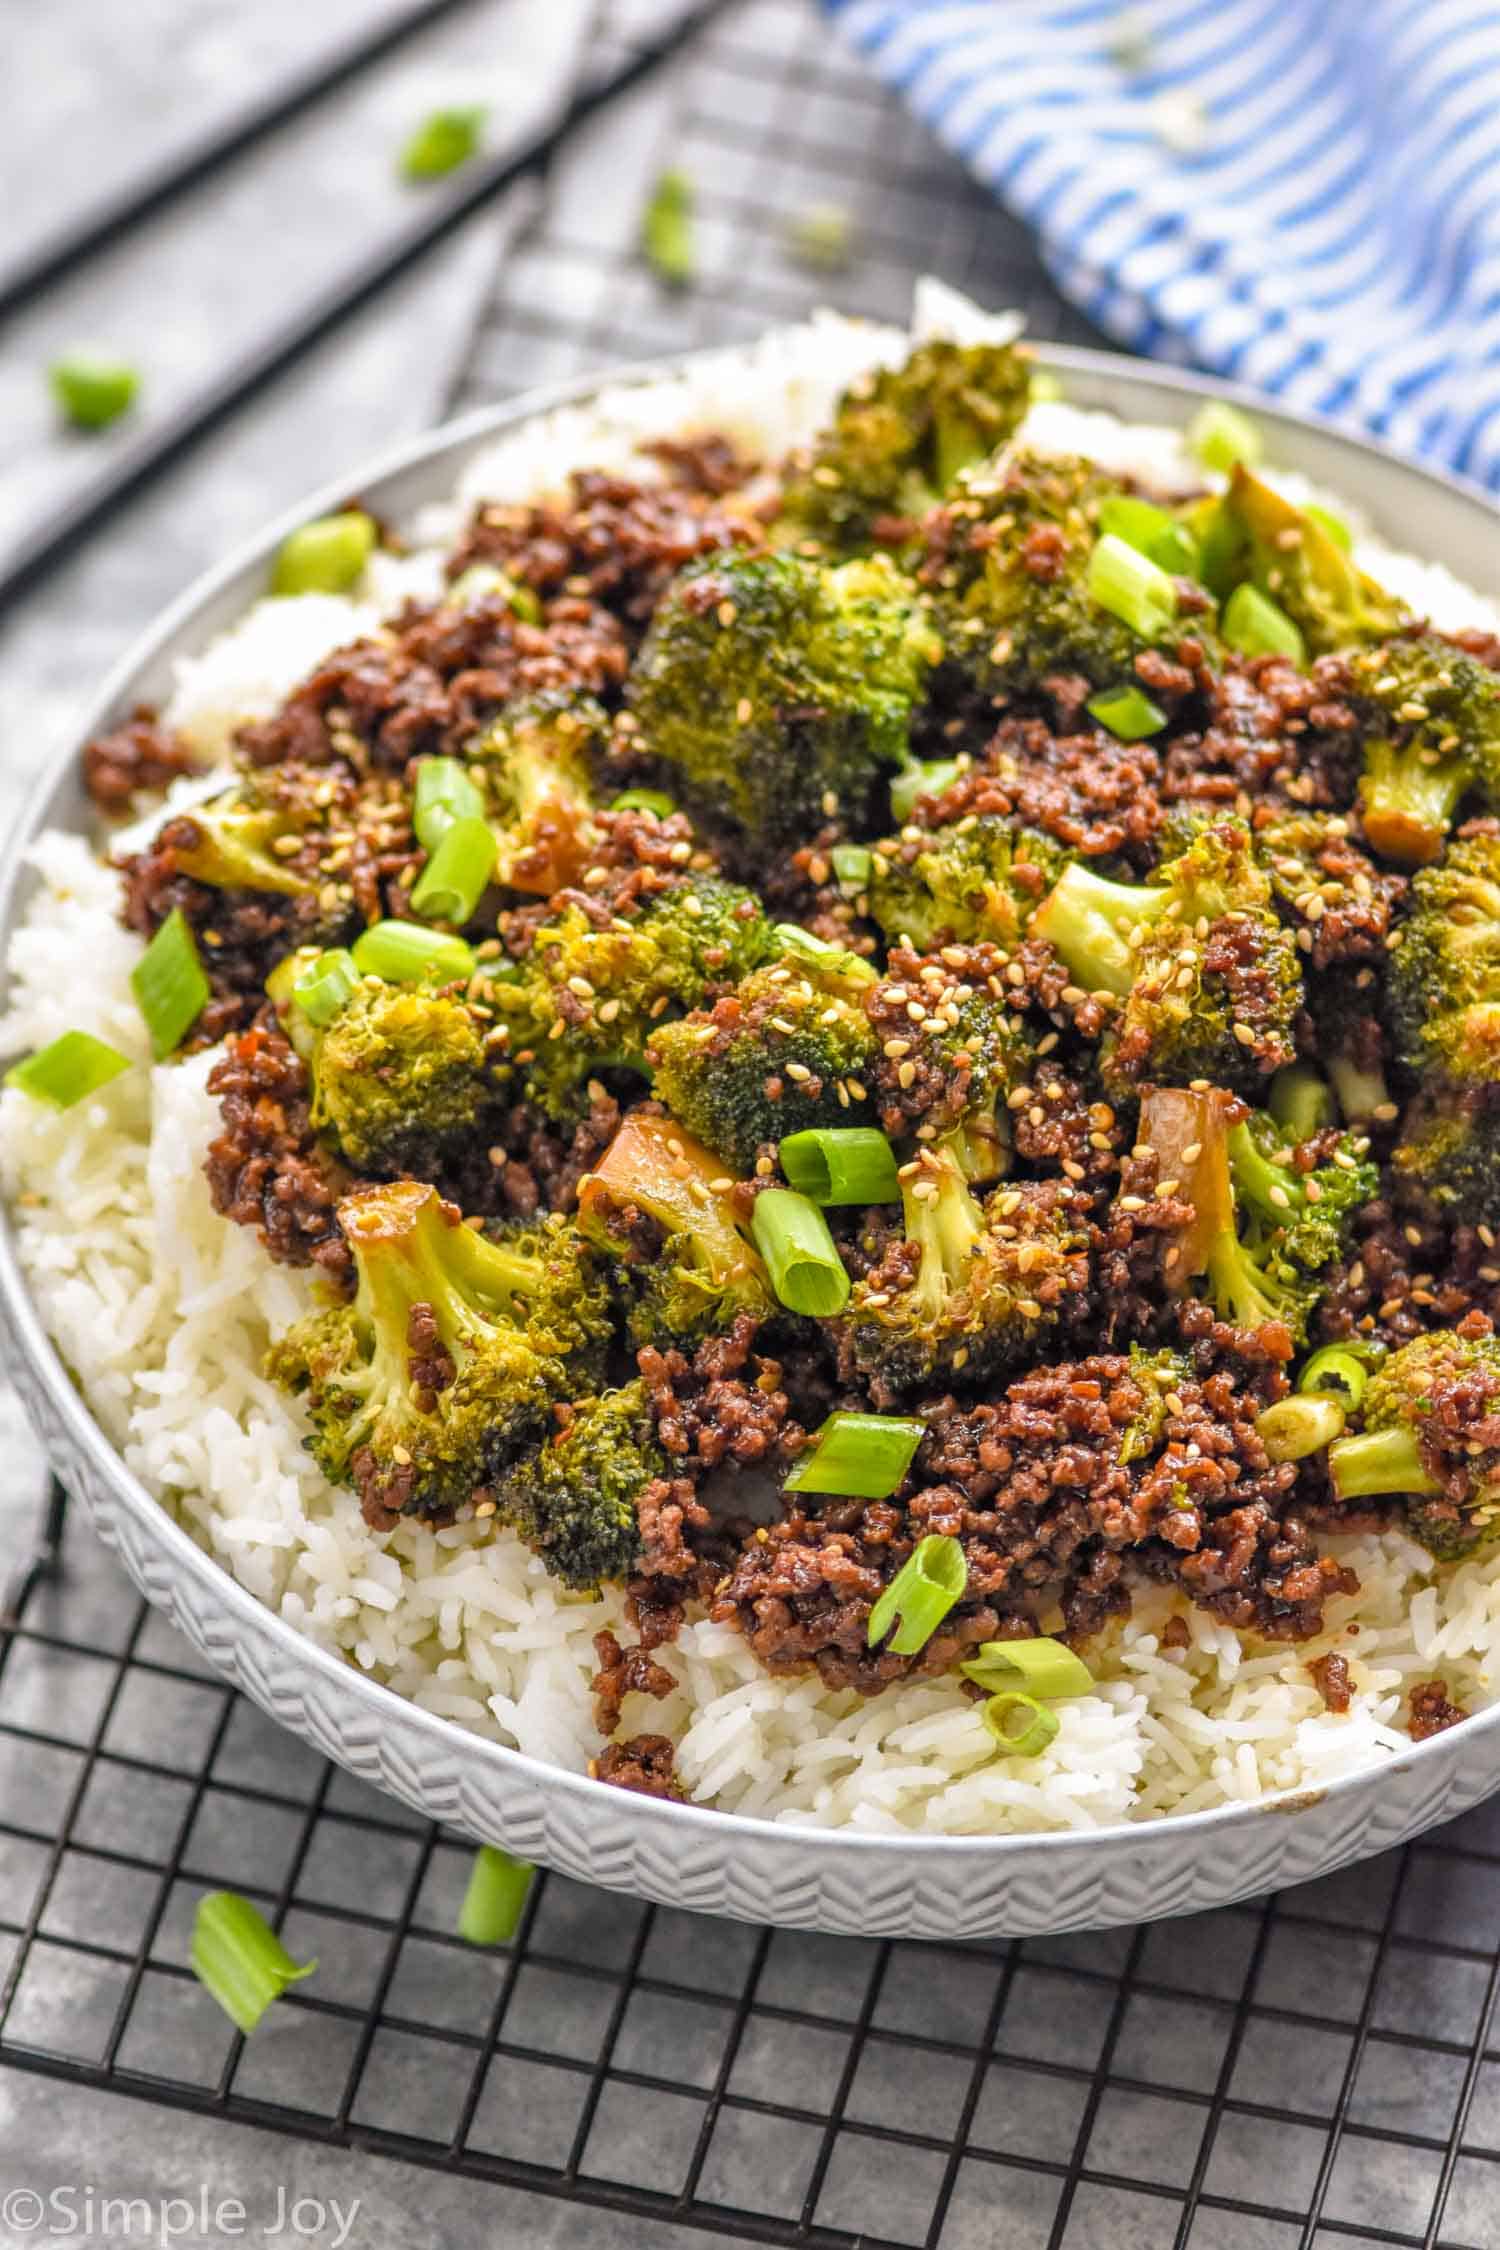 https://www.simplejoy.com/wp-content/uploads/2021/07/ground-beef-and-broccoli-recipe.jpg